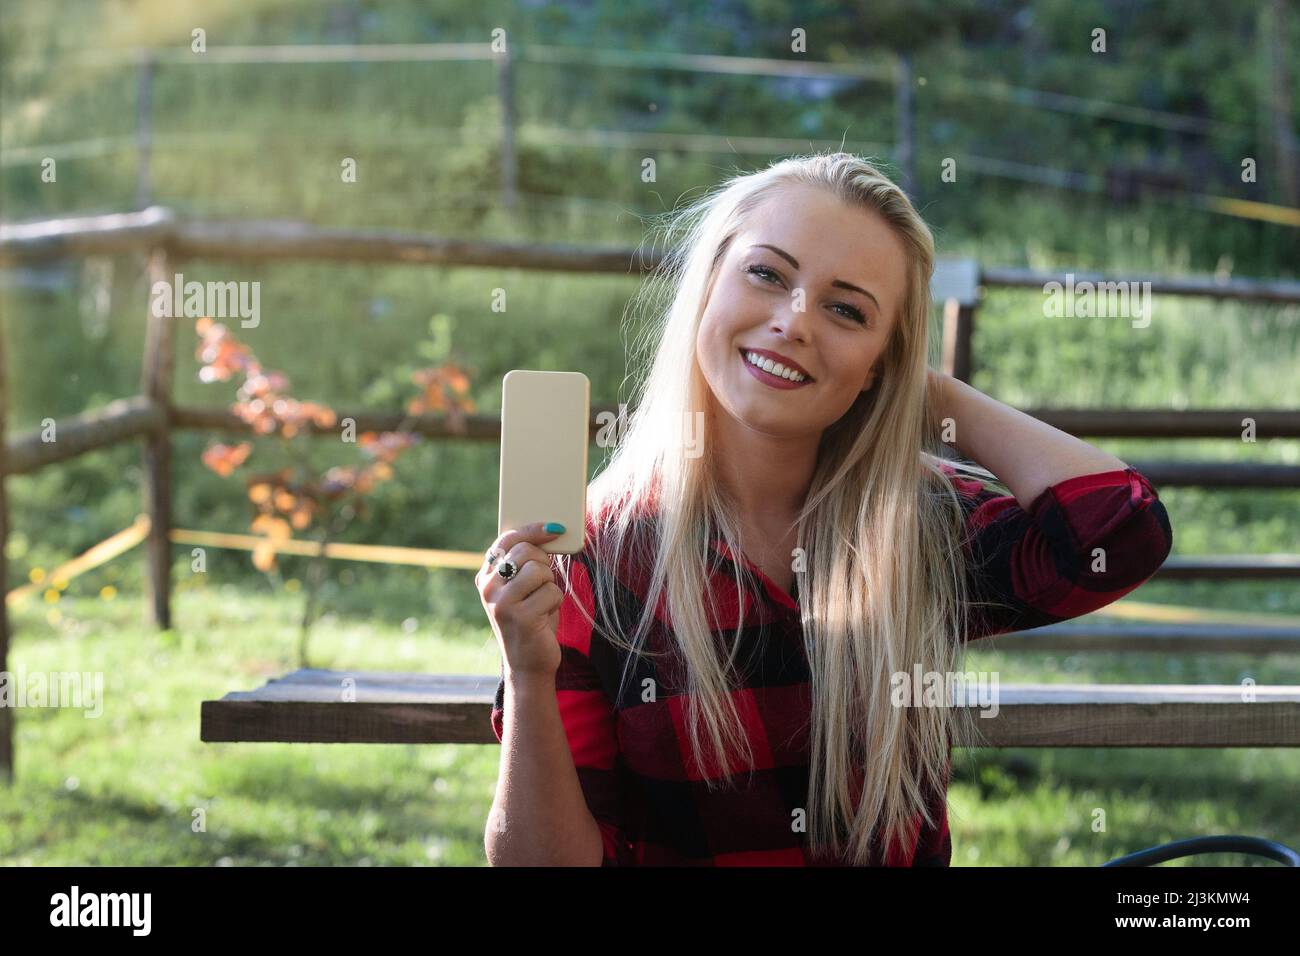 Attractive young blond woman posing holding up a mobile phone with her hand to her hair and a lovely warm smile outdoors on a bench in a garden Stock Photo